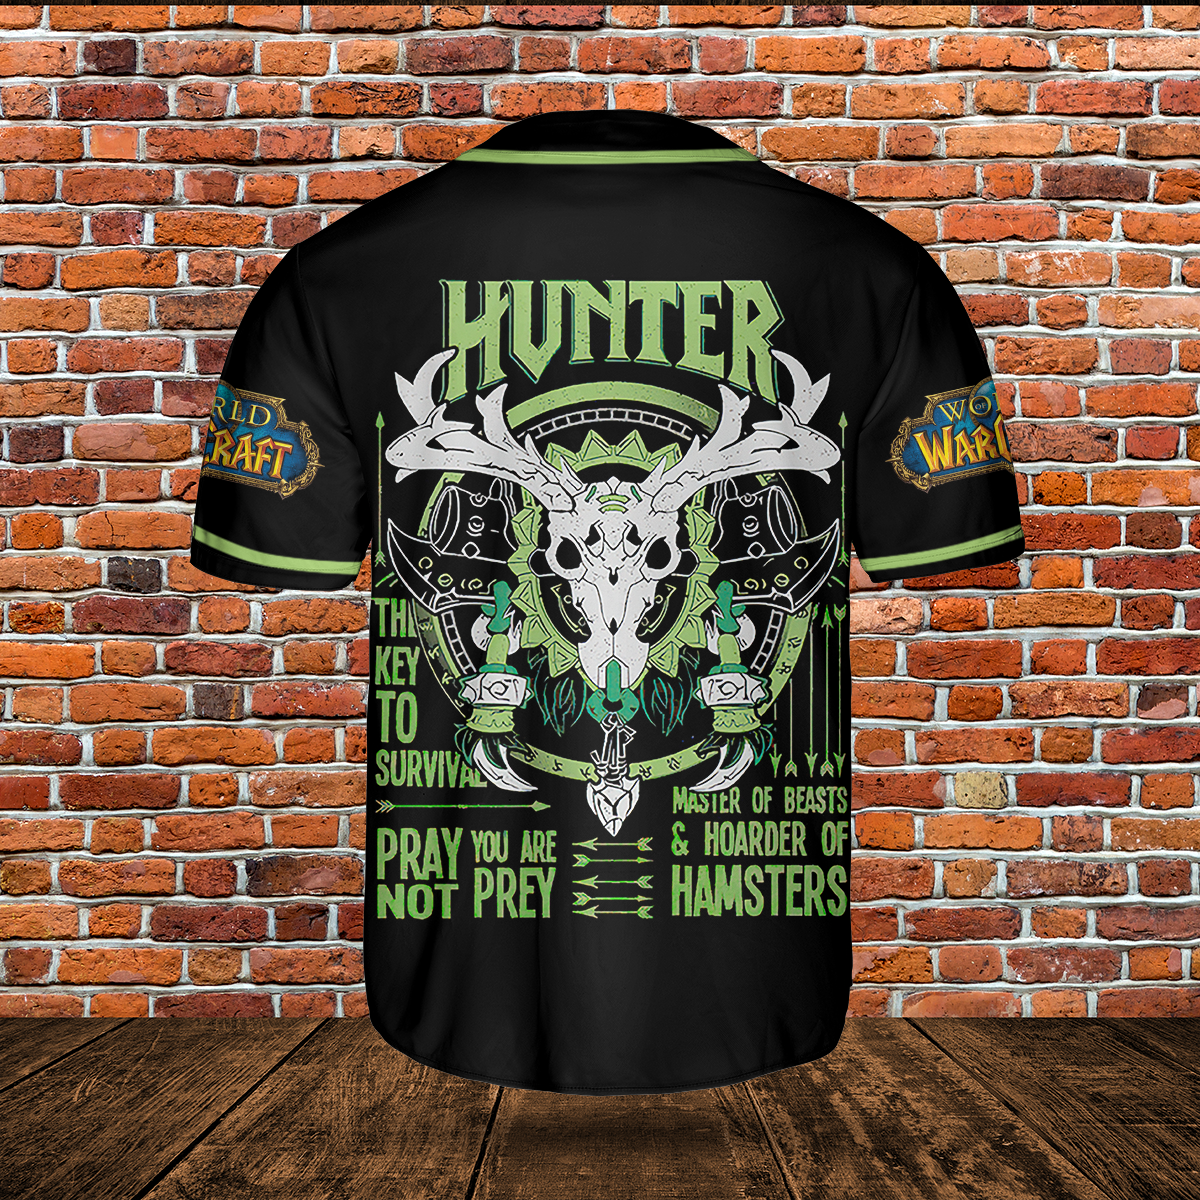 Hunter Class Icon V4 Classic Wow Collection AOP Baseball Jersey